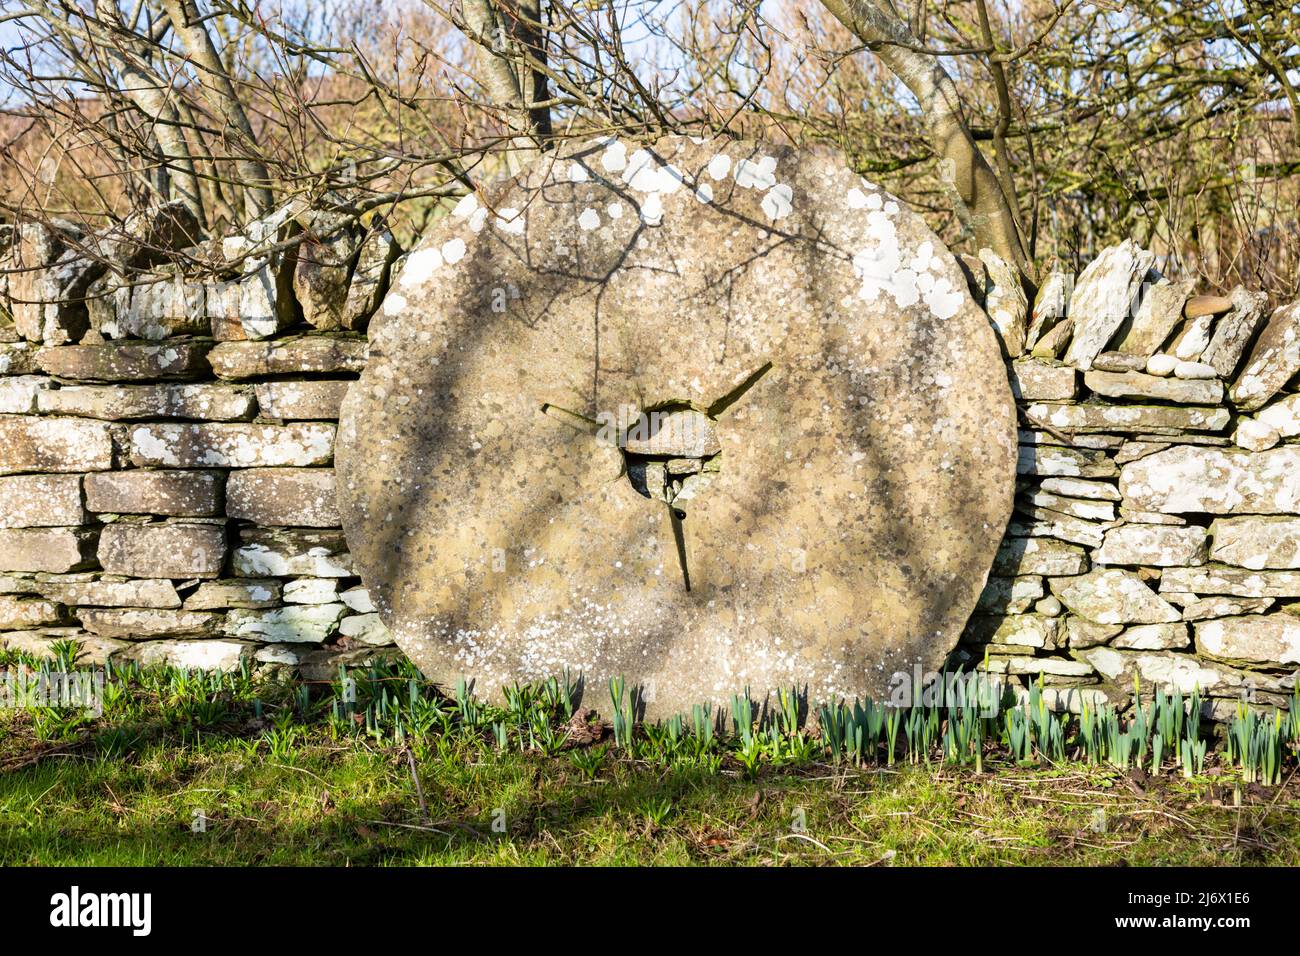 Old stone millstone leaning on a drystone wall, Orkney, UK Stock Photo